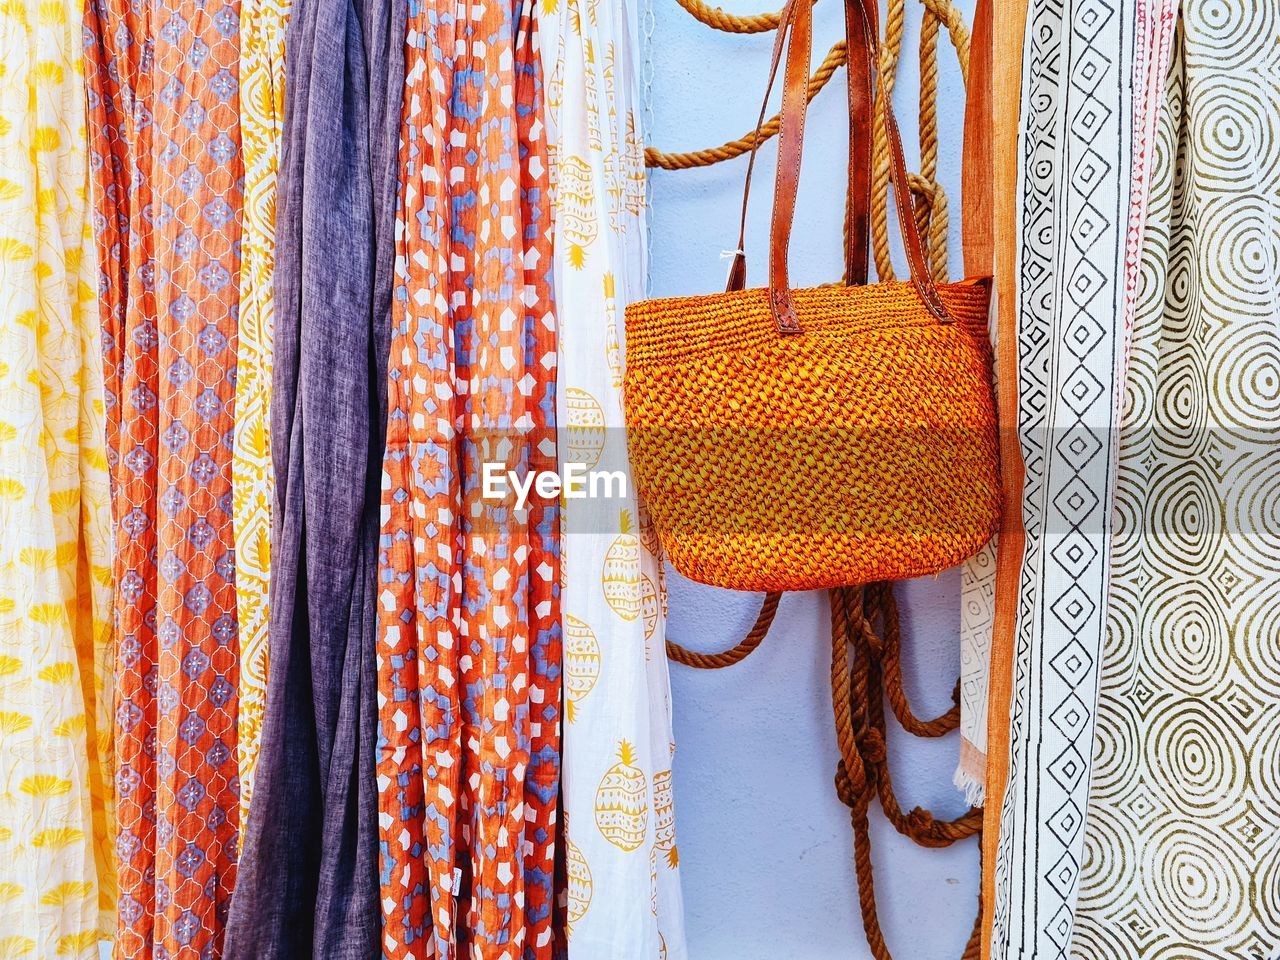 orange, hanging, clothing, pattern, fashion accessory, textile, yellow, multi colored, no people, retail, indoors, fashion, handbag, art, variation, for sale, craft, market, orange color, coathanger, store, dress, shopping, close-up, retail display, still life, bag